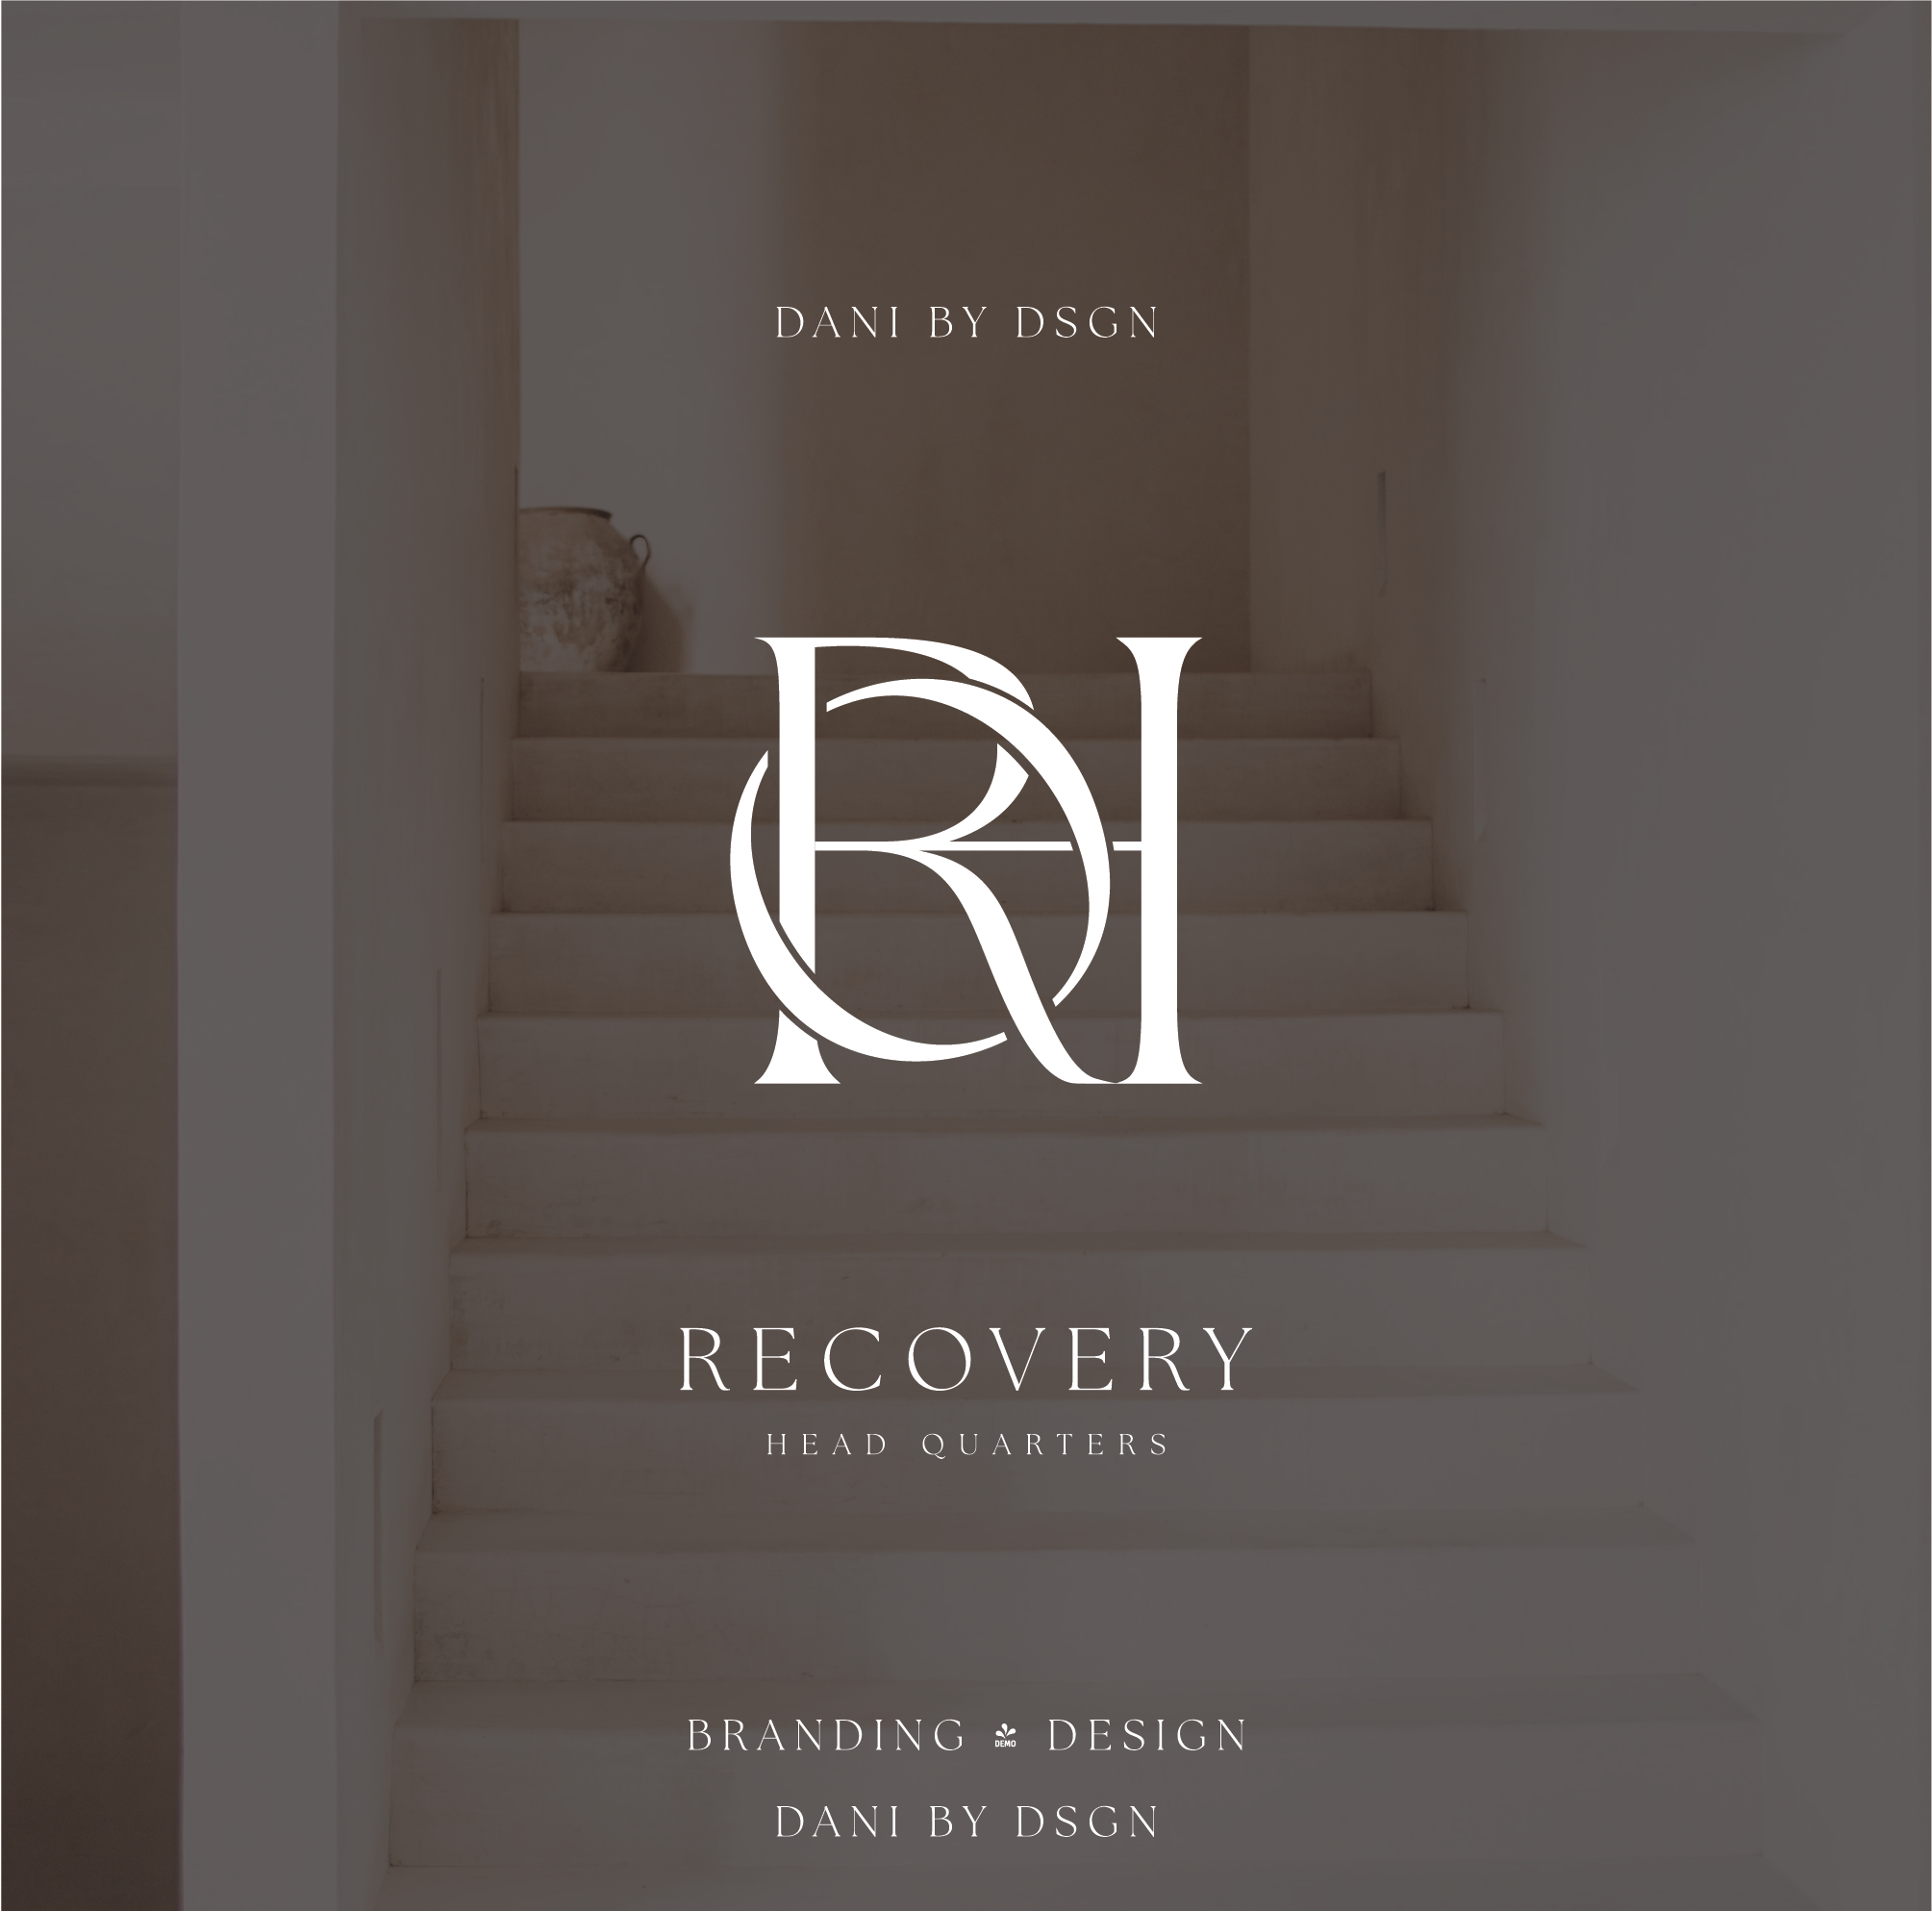 Image presents Recovery Headquarters’ initial monogram logo design, created by Danibydsgn, a specialist in business branding and small business logo design. This business monogram logo, by an experienced graphic designer, is a testament to bespoke business branding. Set against a serene staircase backdrop, the logo merges seamlessly with the architecture, reflecting the company’s ethos in website brand logo and clothing branding. Danibydsgn’s role as an experienced business logo designer is evident.